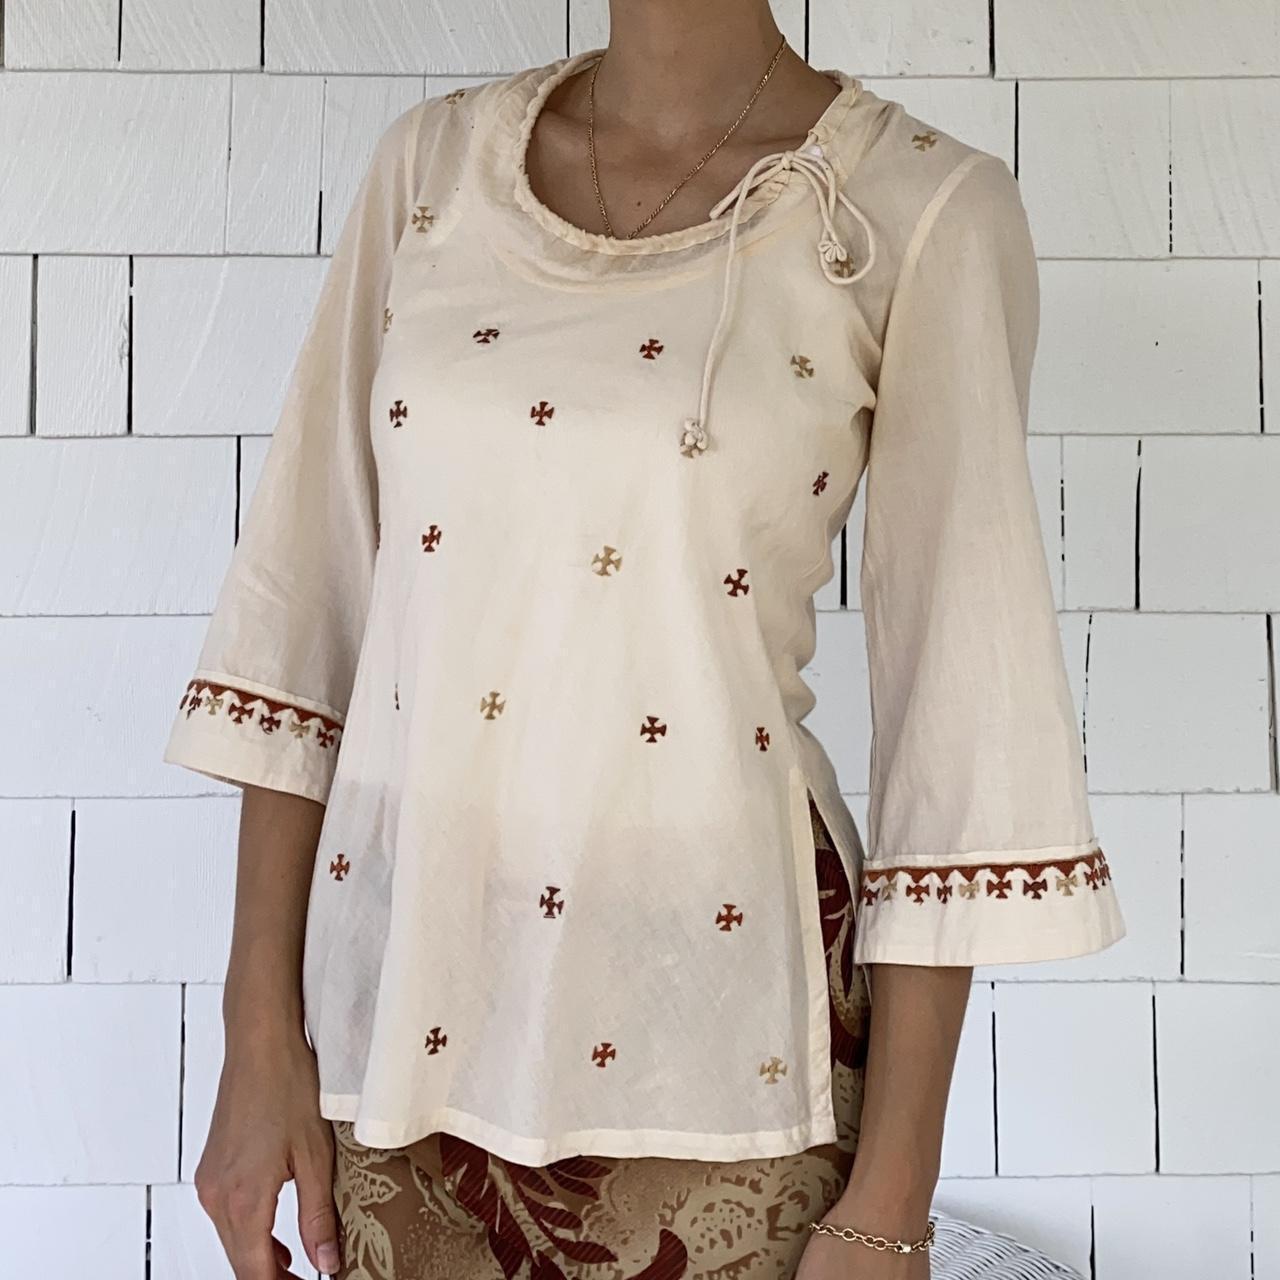 ANOKHI Women's Cream and Brown Blouse